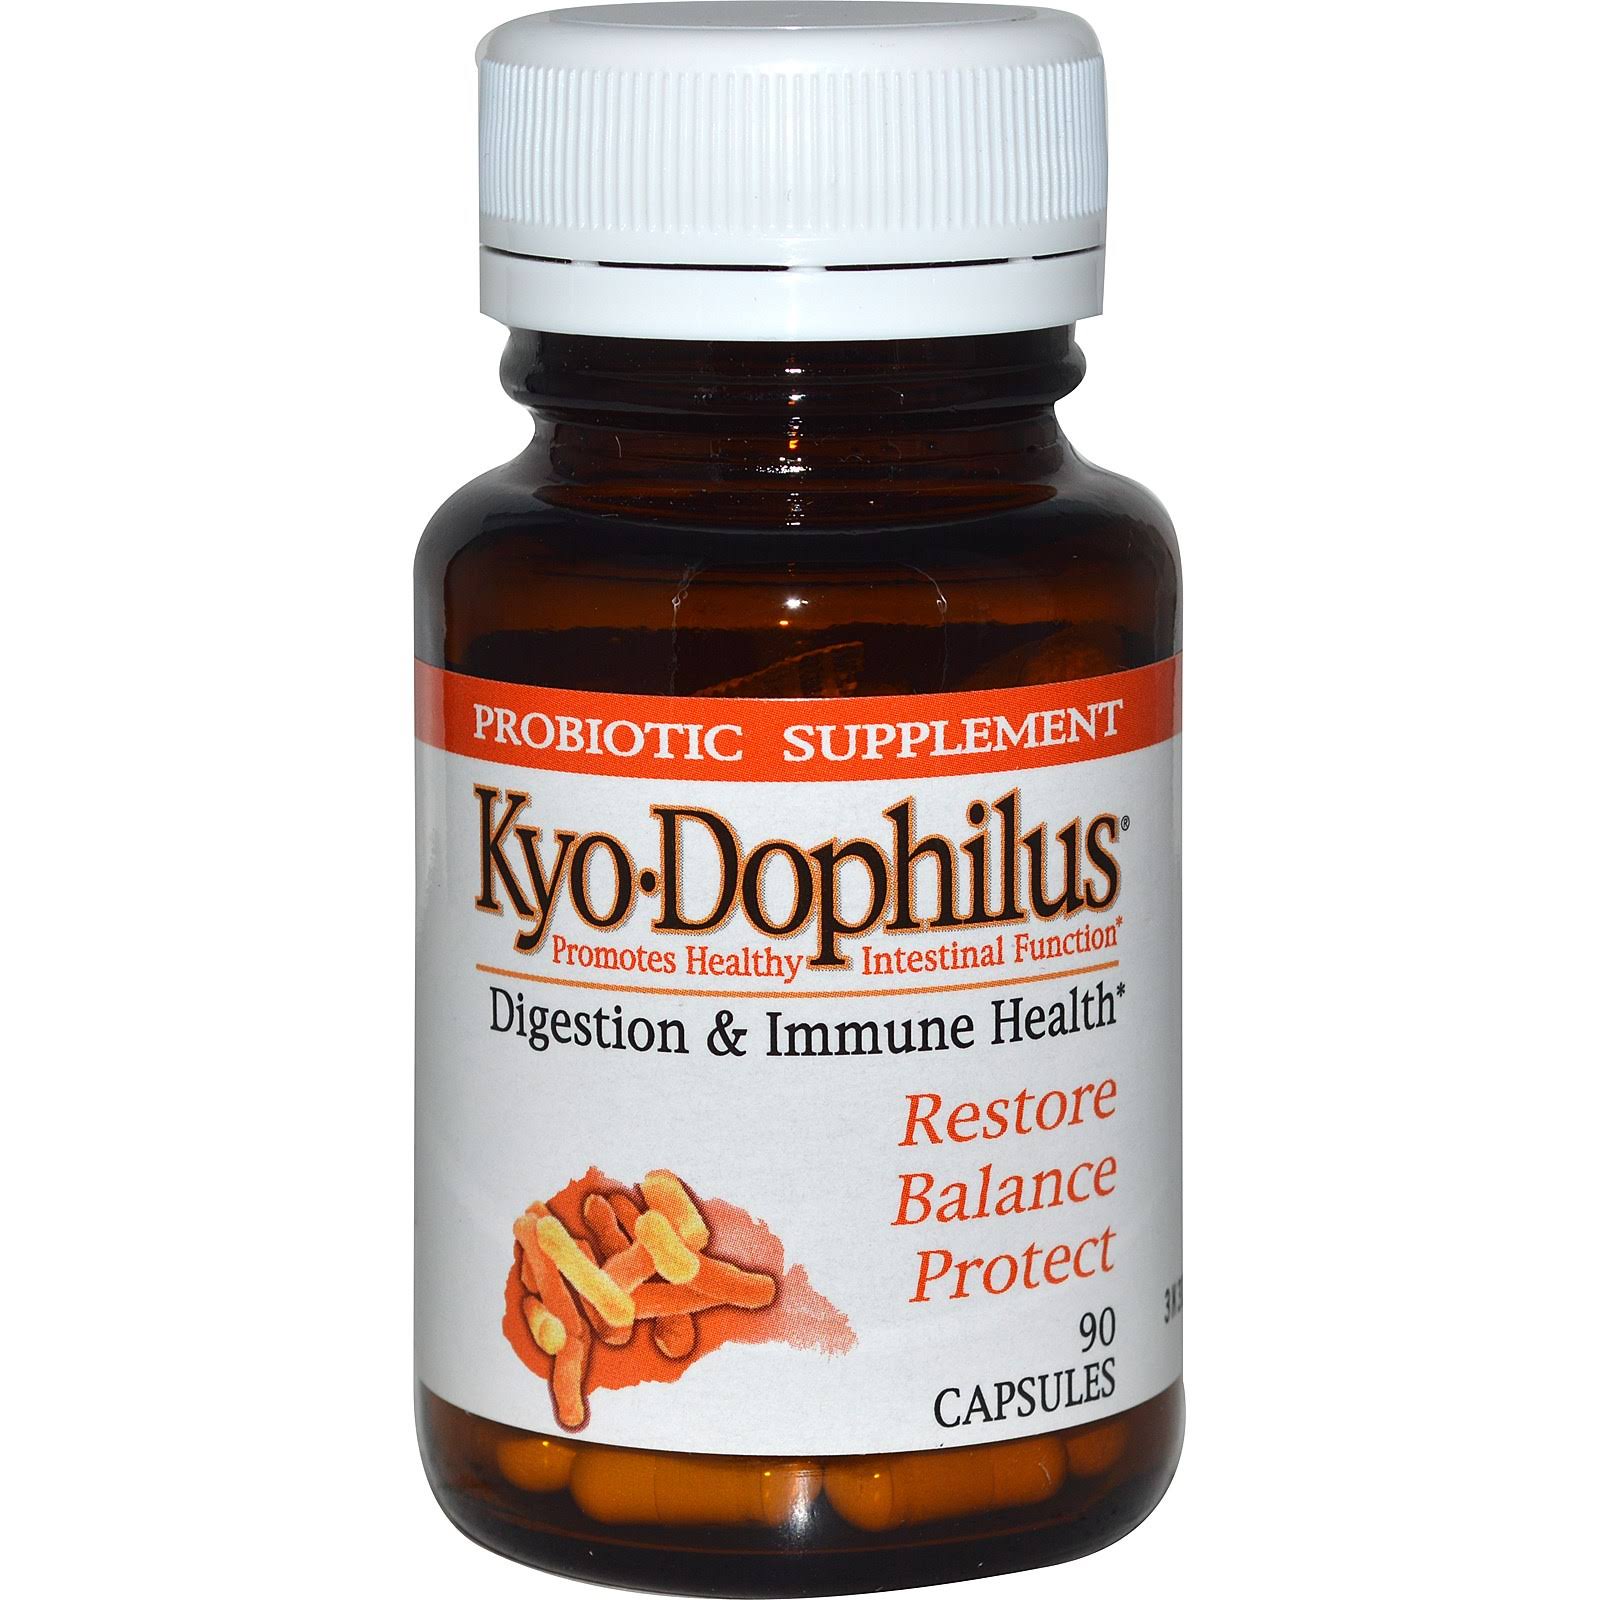 Kyolic Kyo-dophilus Digestion and Immune Health Supplement - 90 Capsules